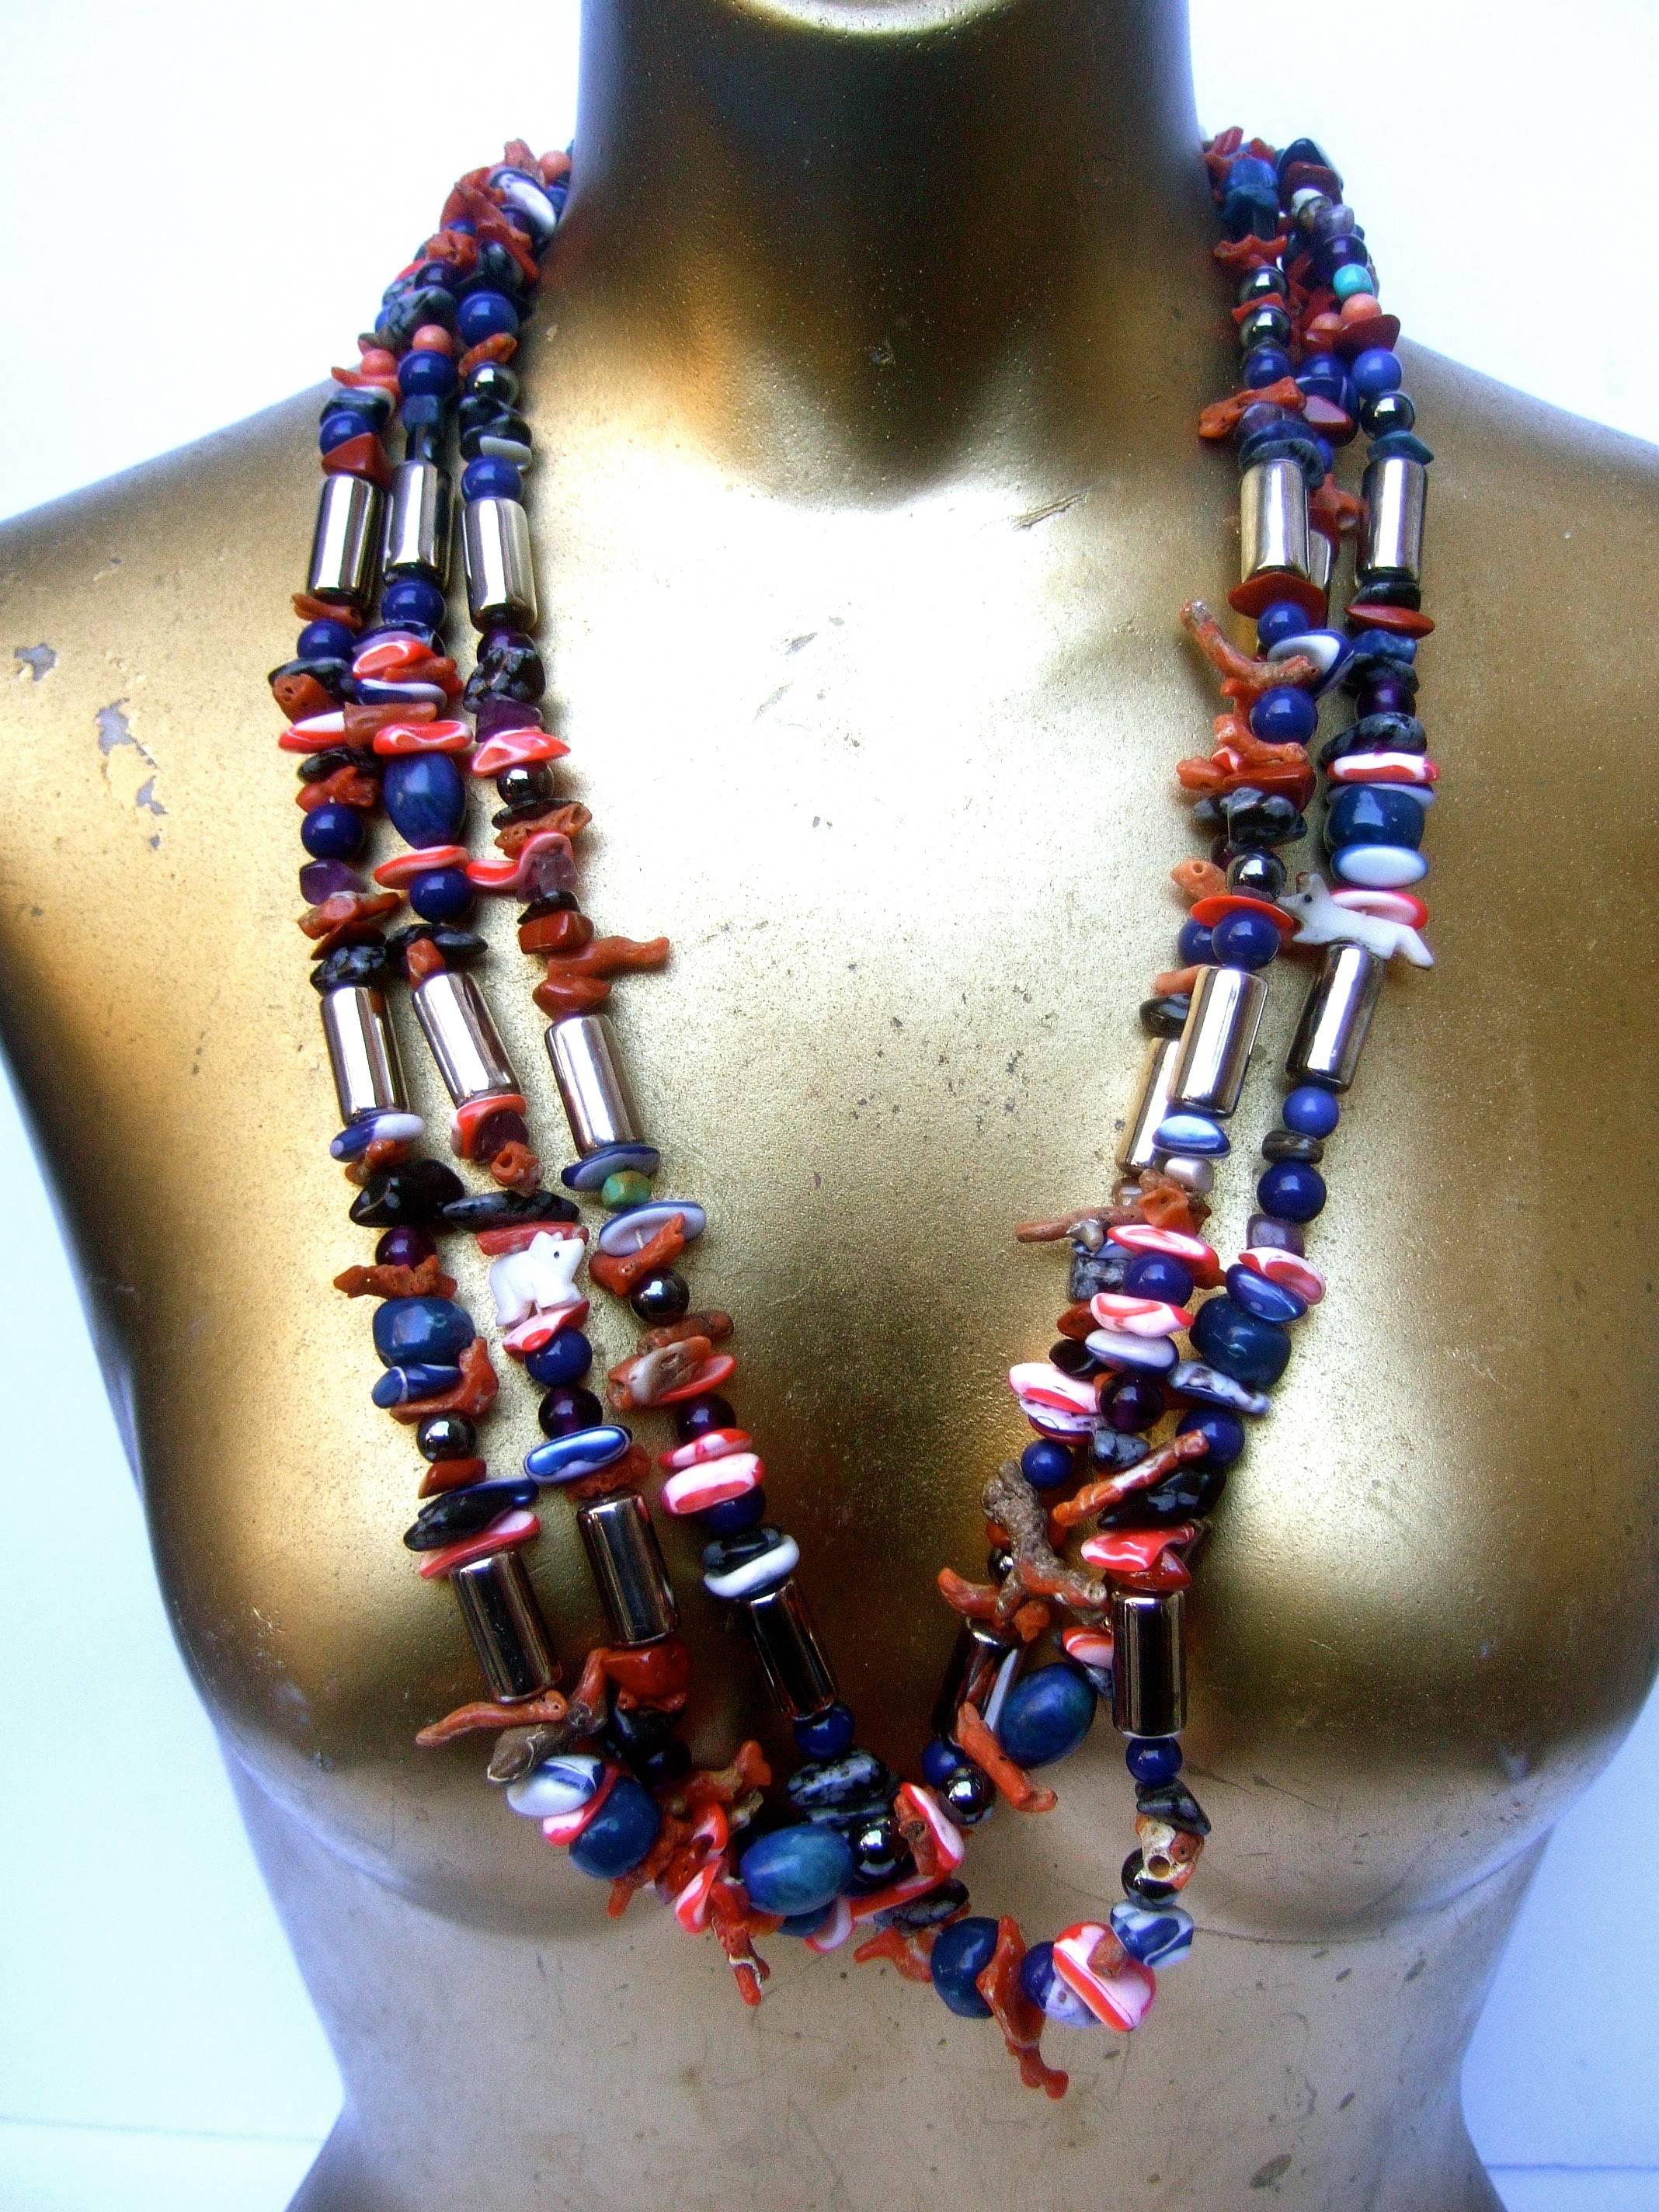 Exotic artisan coral & lapis statement necklace
The unique handmade artisan necklace is a collection
of semi precious smooth & jagged beads & stones

The myriad of semi precious embellishments consists 
of lapis, coral, agate, amethyst, hematite &